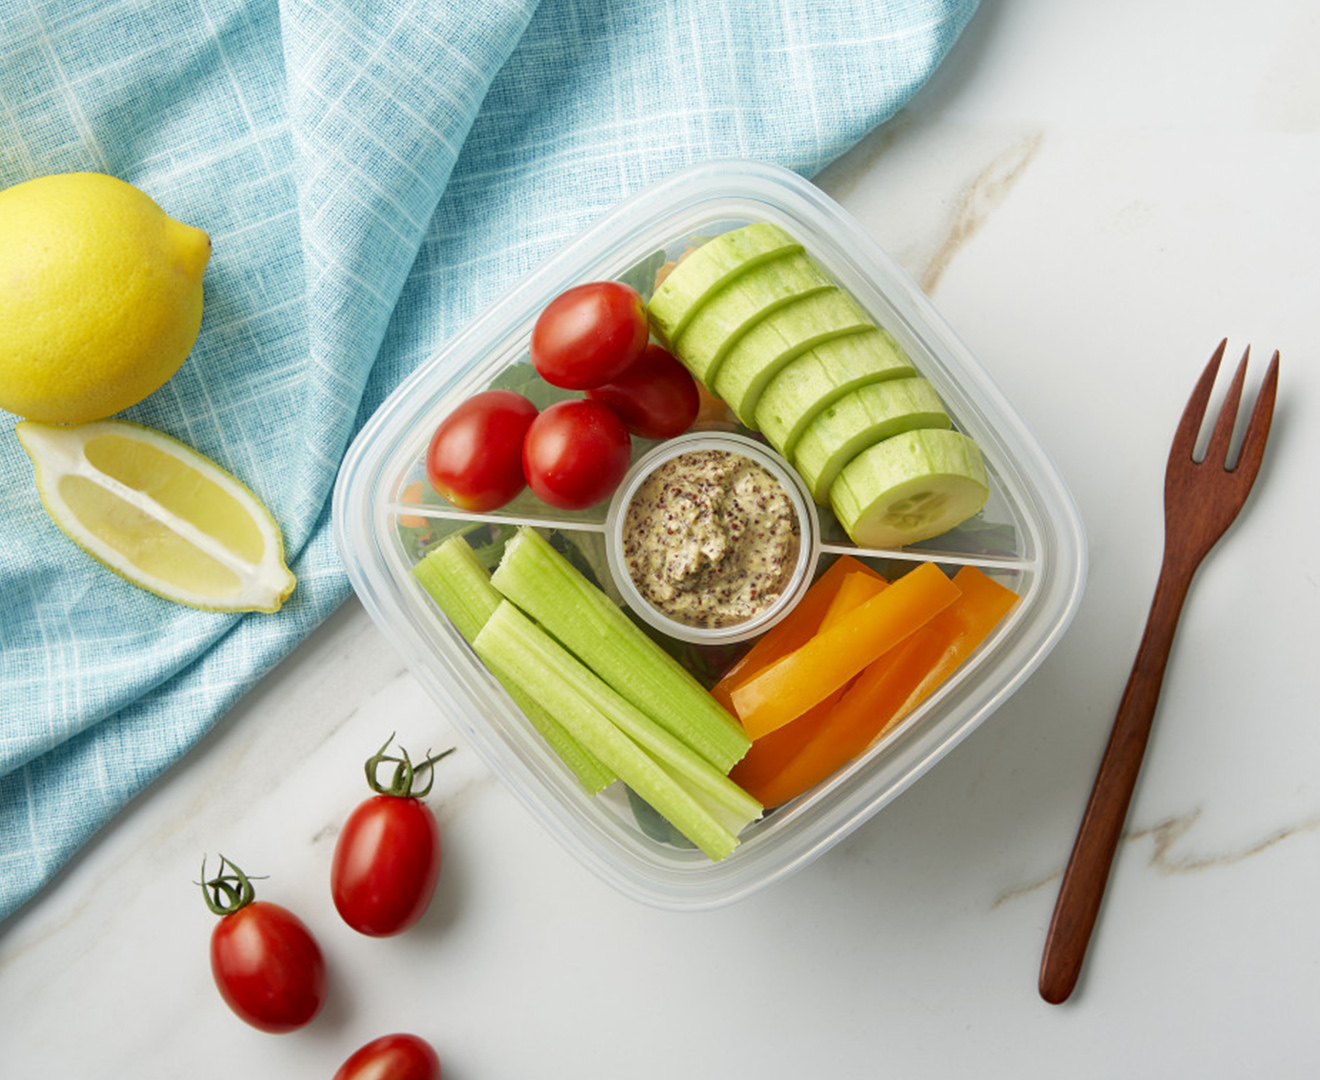 Lock & Lock 950mL Special Salad Lunch Box with Dividers | Catch.co.nz